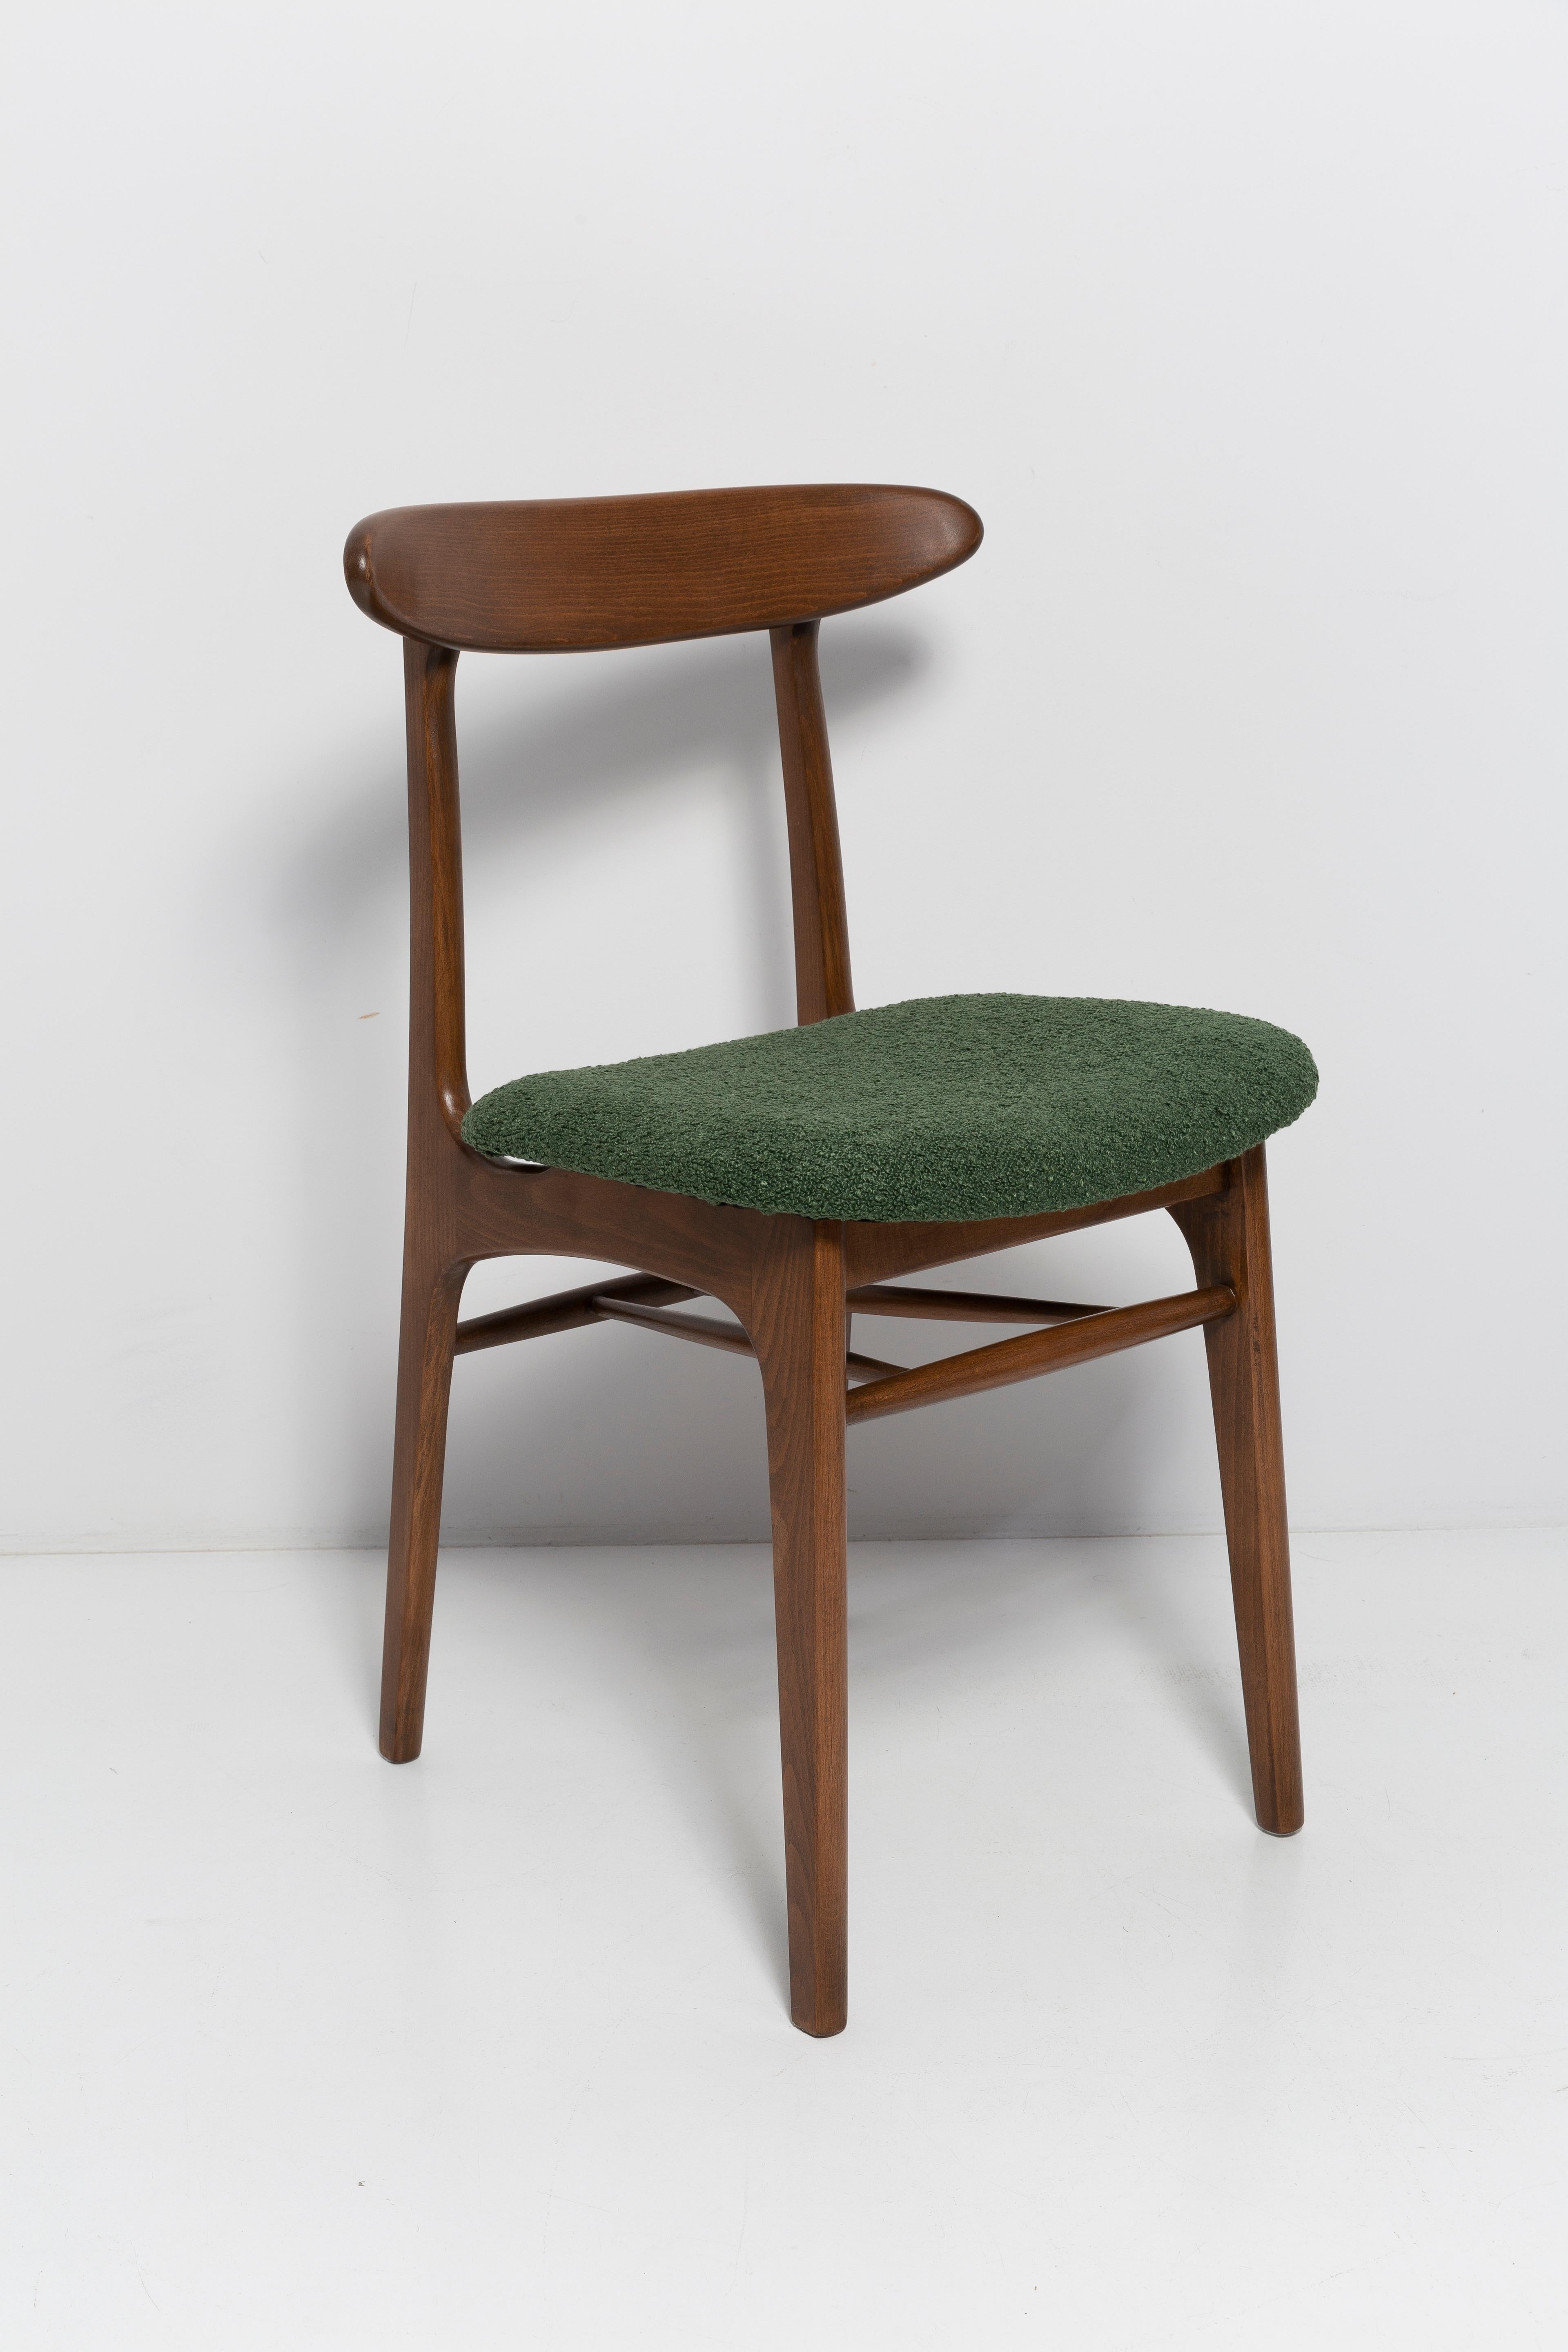 Chair designed by Prof. Rajmund Halas. Made of beechwood. Chair is after a complete upholstery renovation, the woodwork has been refreshed. Seat is dressed in green, durable and pleasant to the touch unique boucle fabric. Chair is stable and very